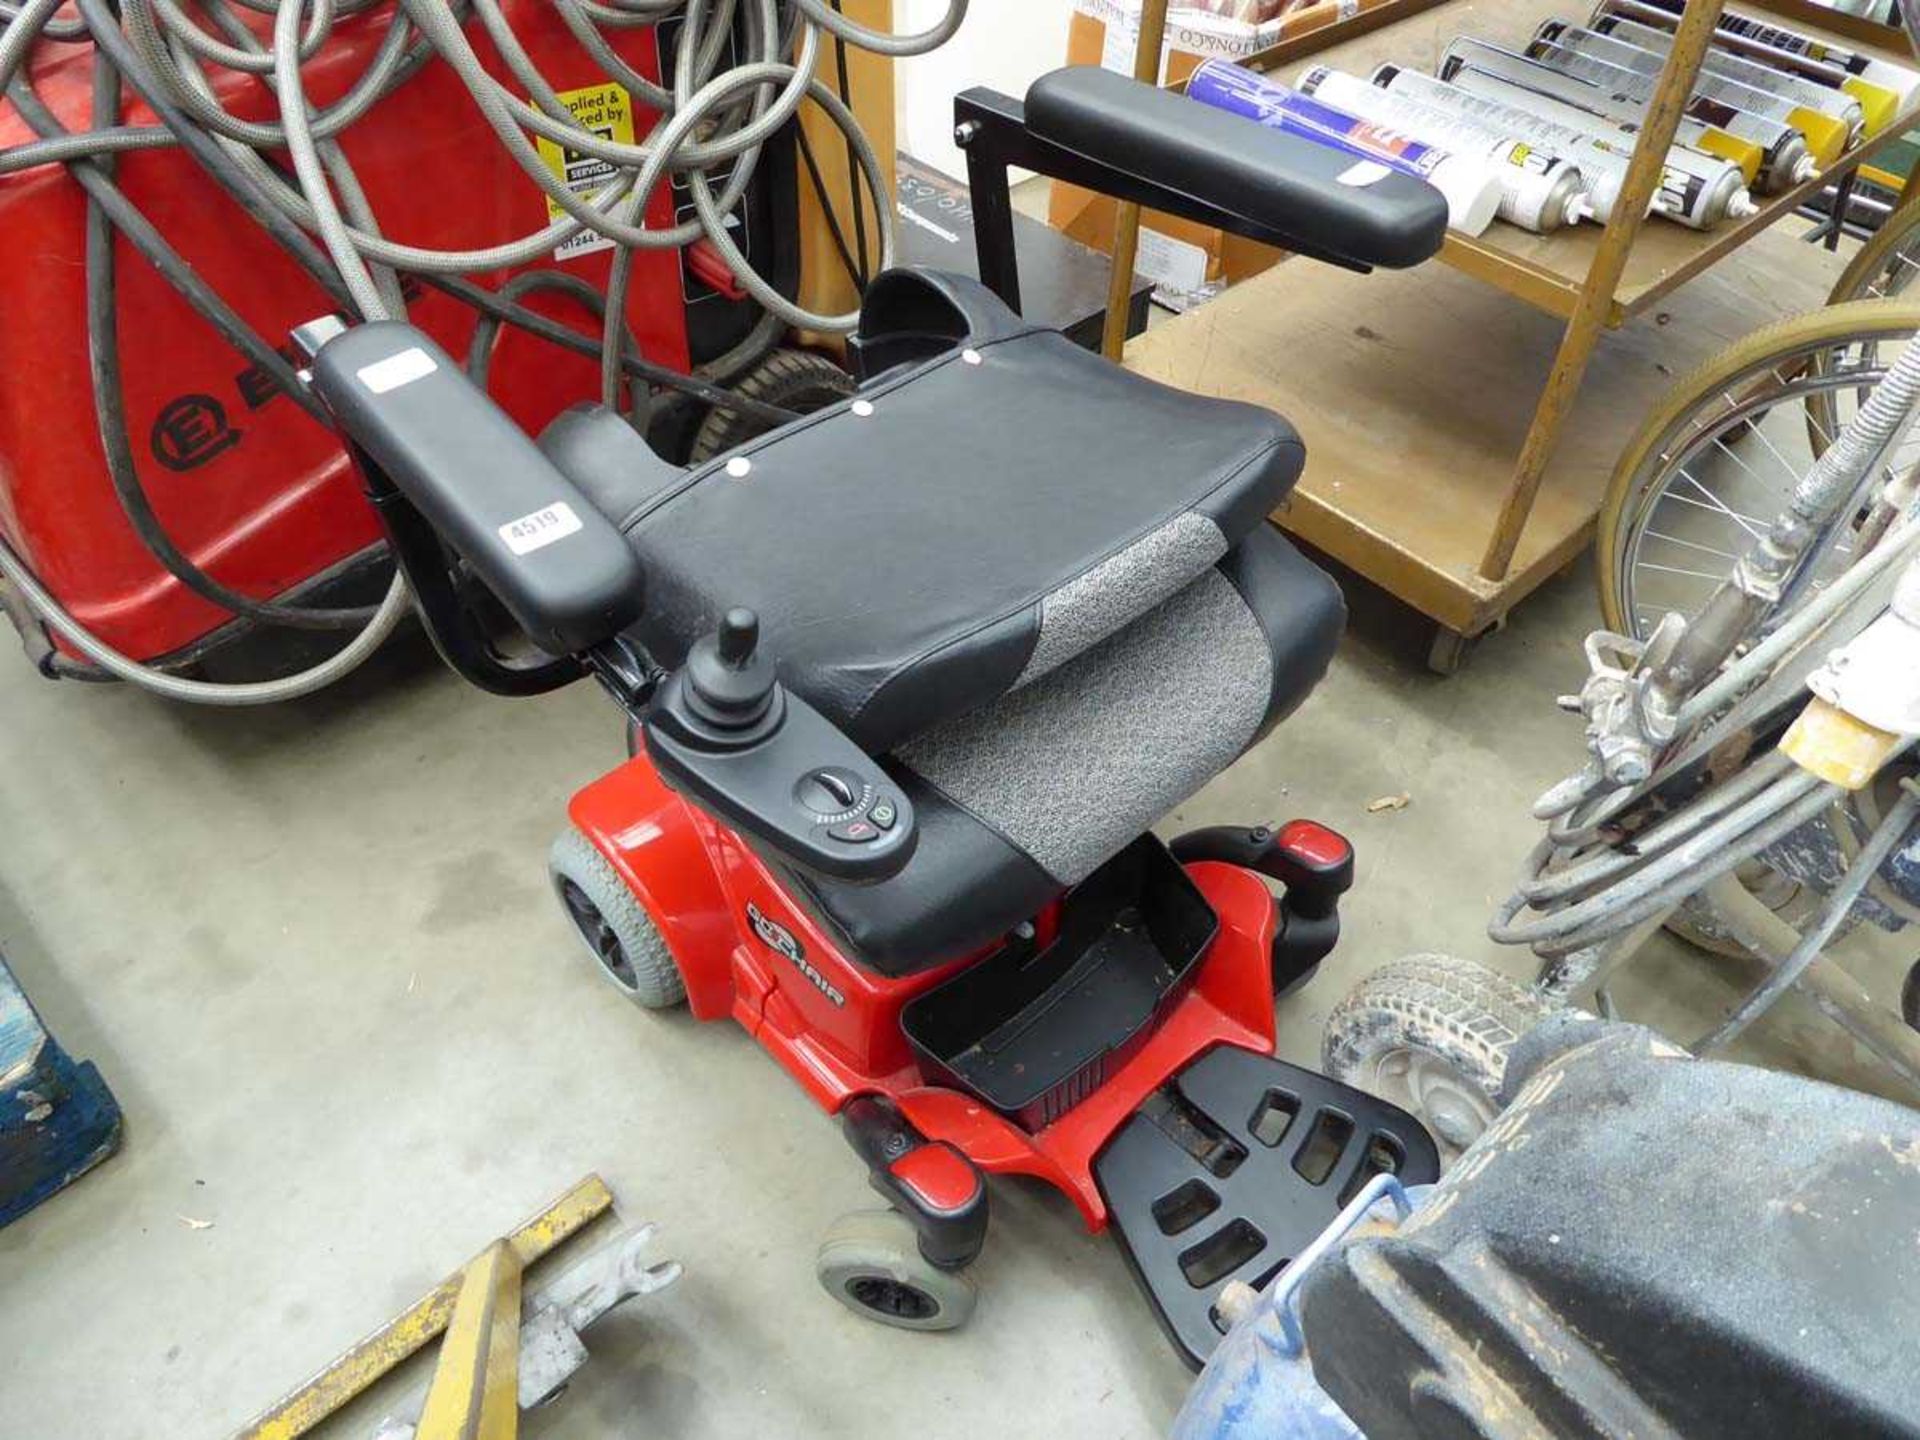 Mobility scooter in red